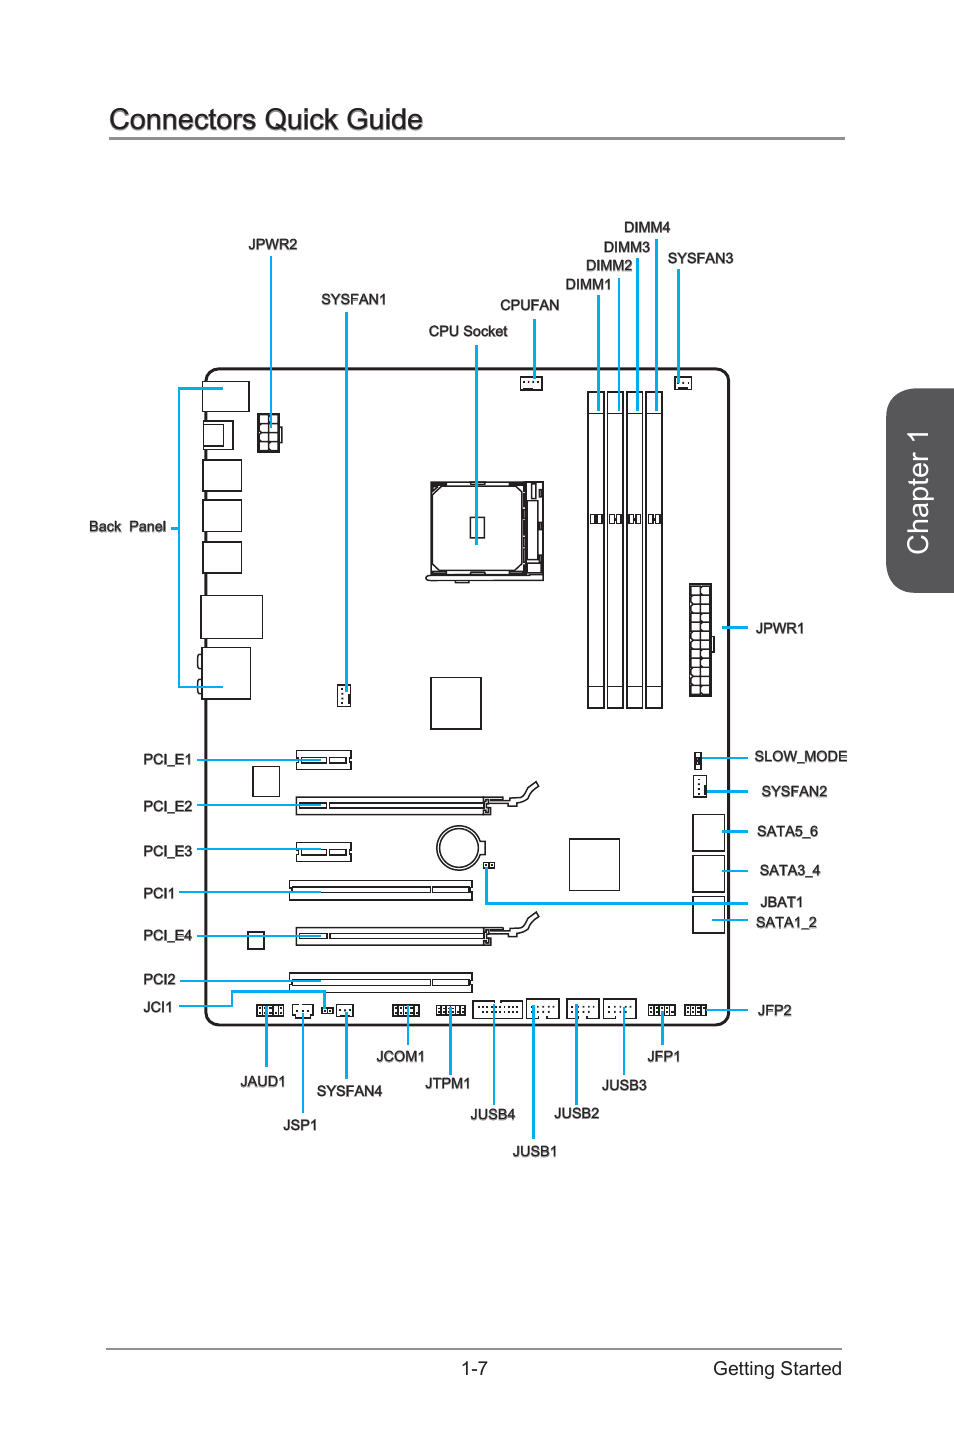 Connectors quick guide -7, Chapter 1, Connectors quick guide | MSI 970  GAMING User Manual | Page 21 / 90